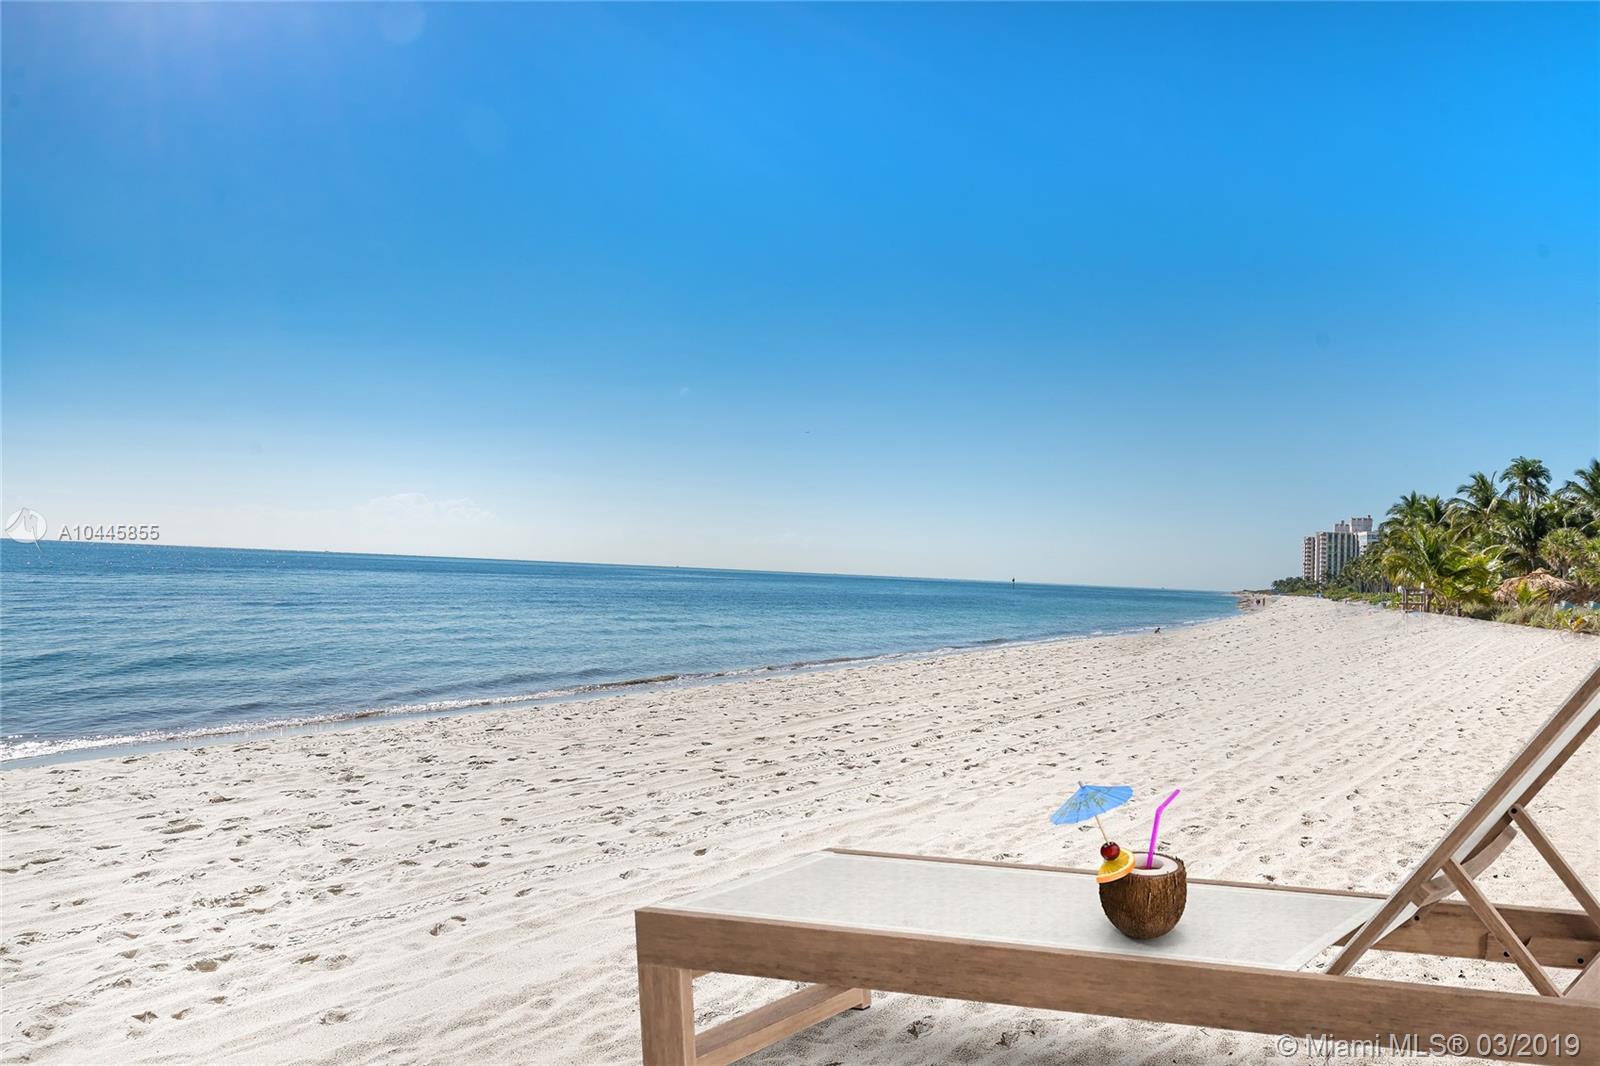 Key Biscayne Waterfront Condos For Sale